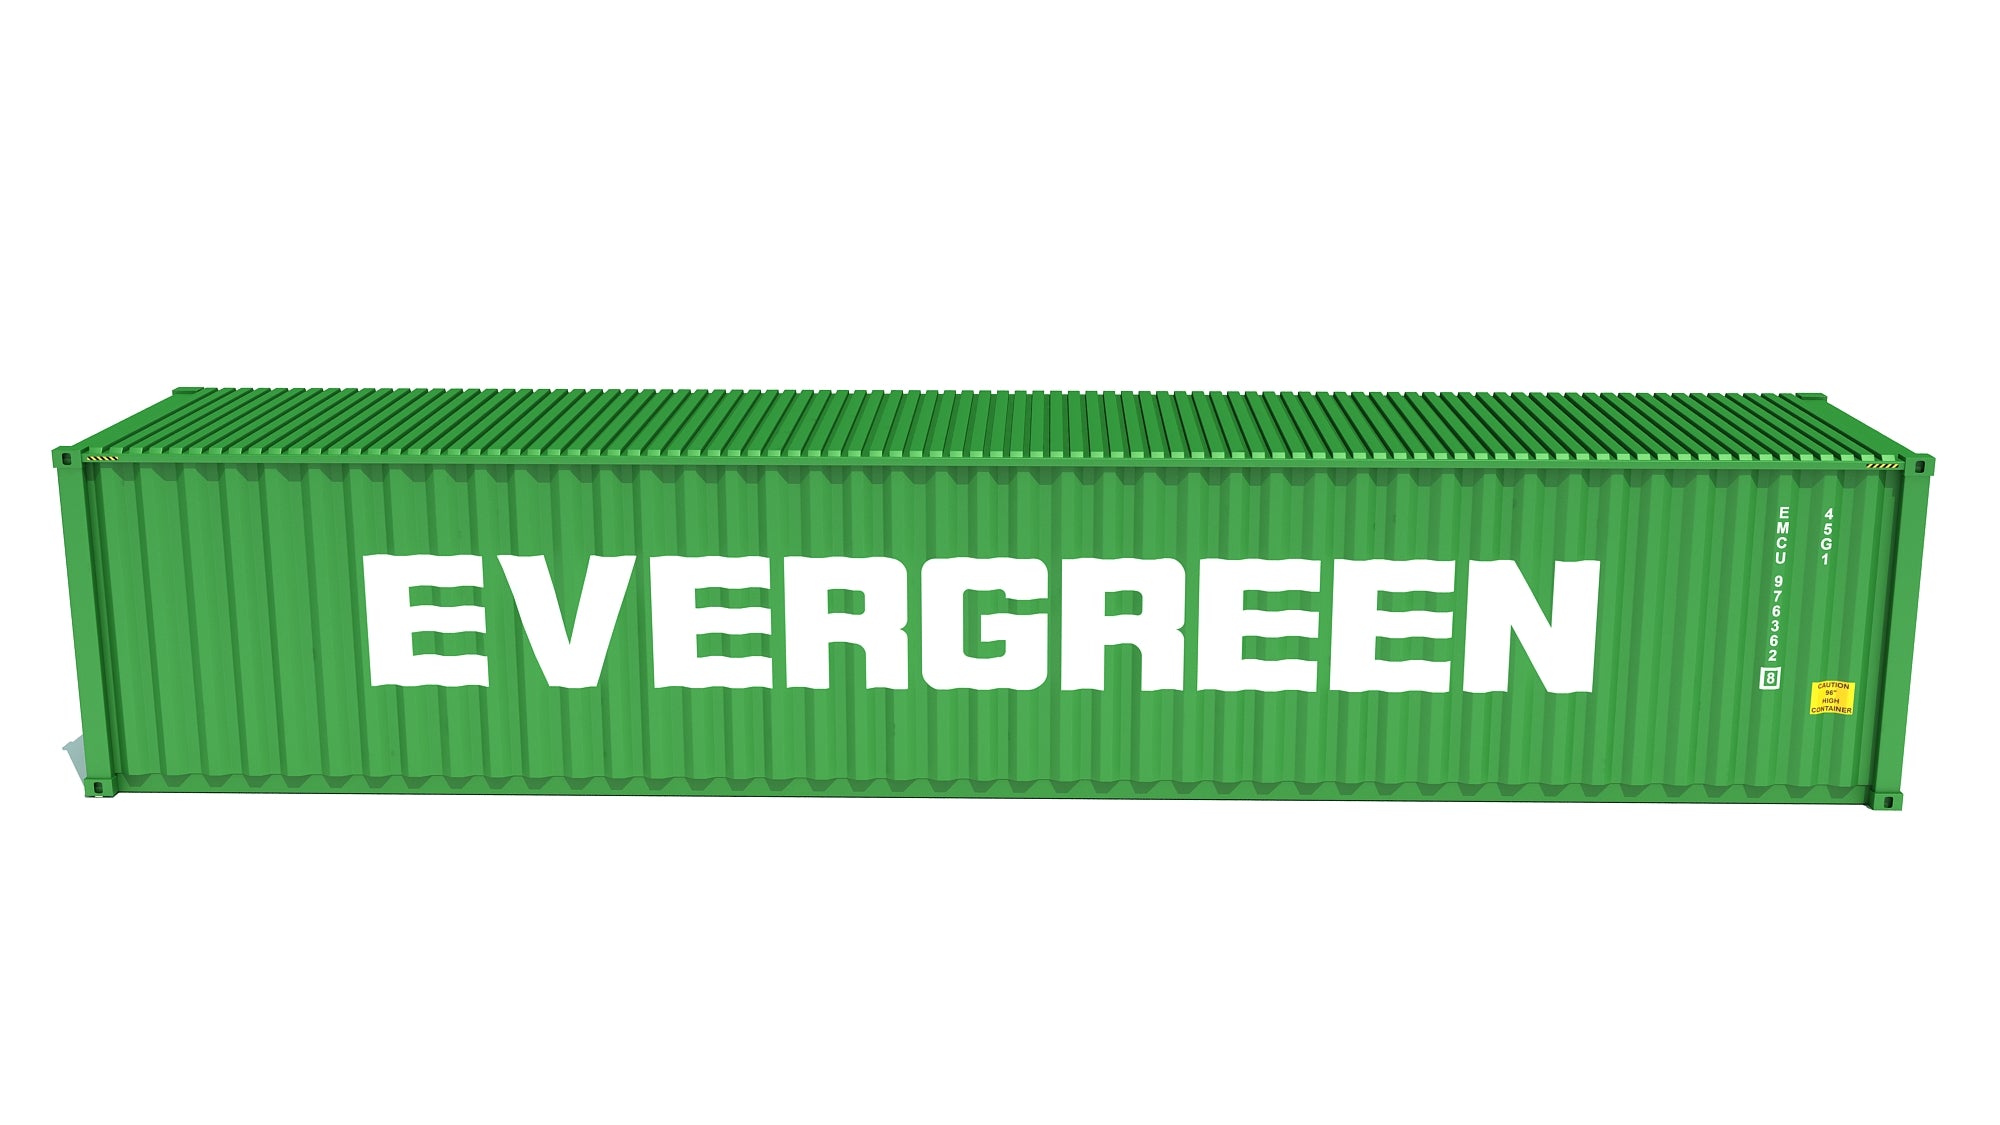 Shipping Container Evergreen